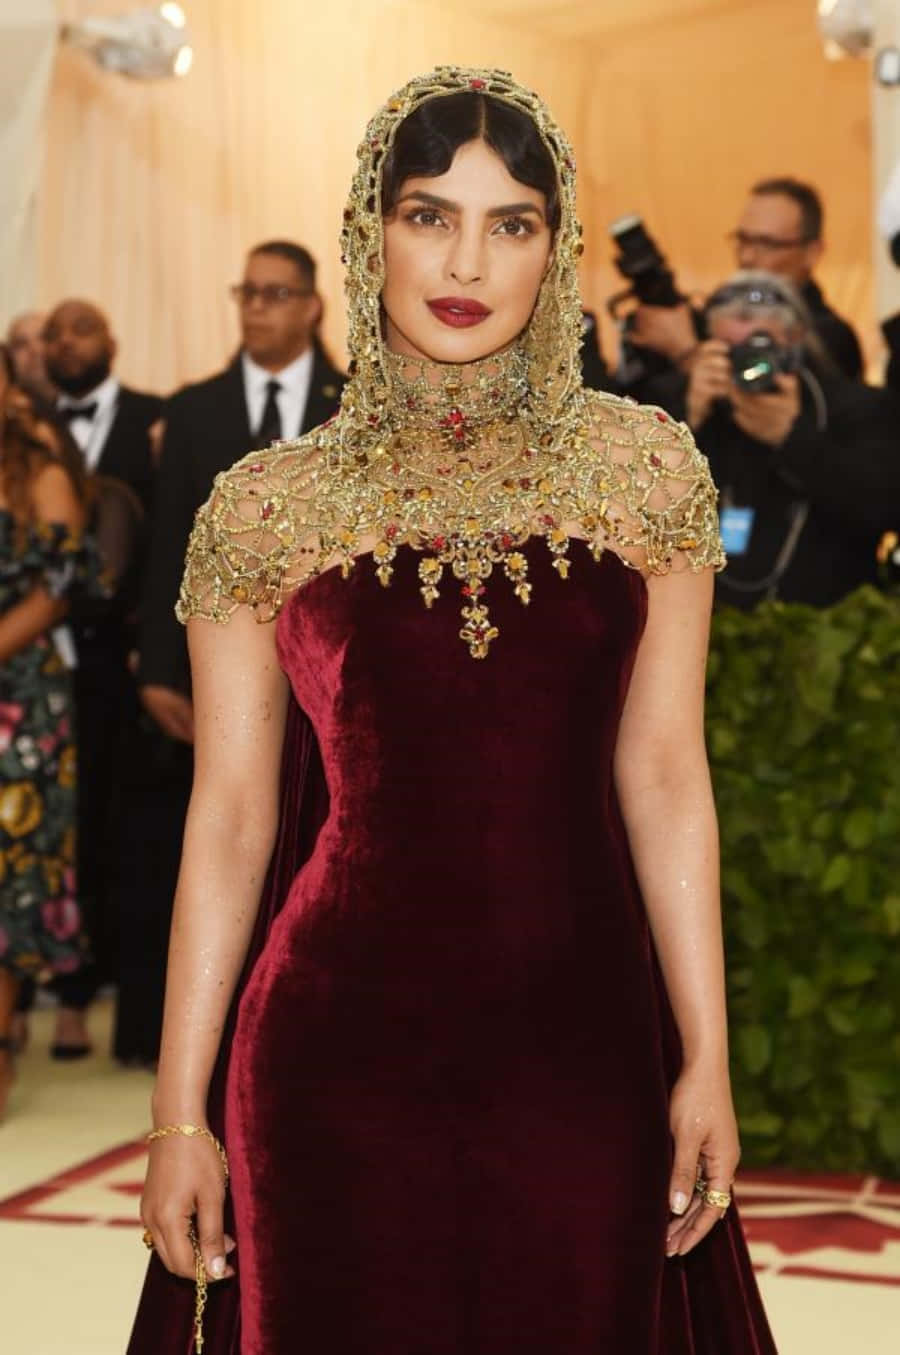 The fashion of the Met Gala 2021 showcases the beauty of high fashion